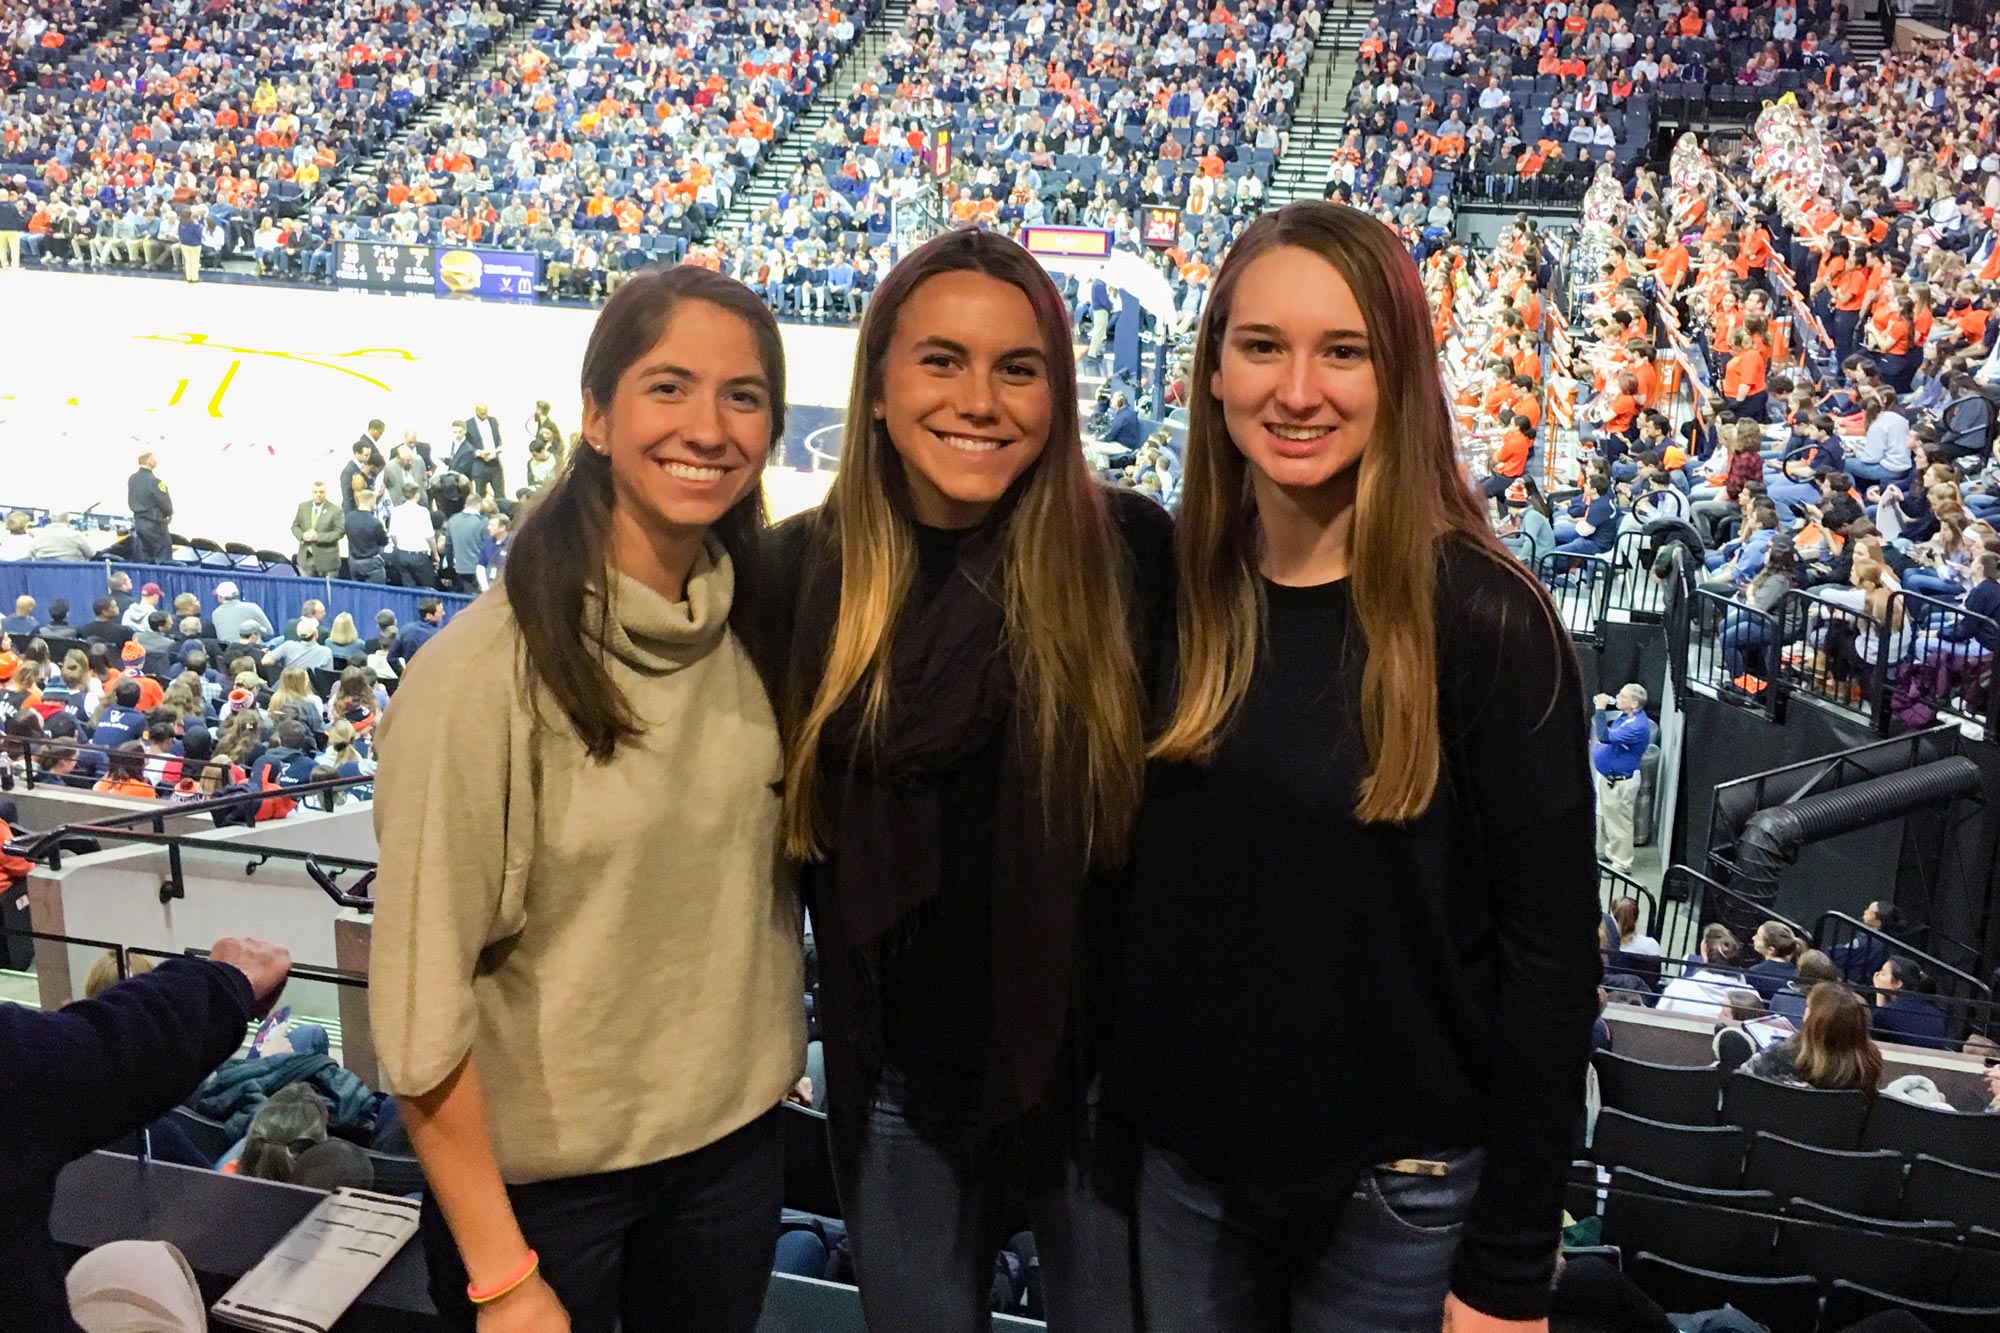 Doss, right, Annie Tyson, left, and Elle Carroll, take a photo together at a basketball game